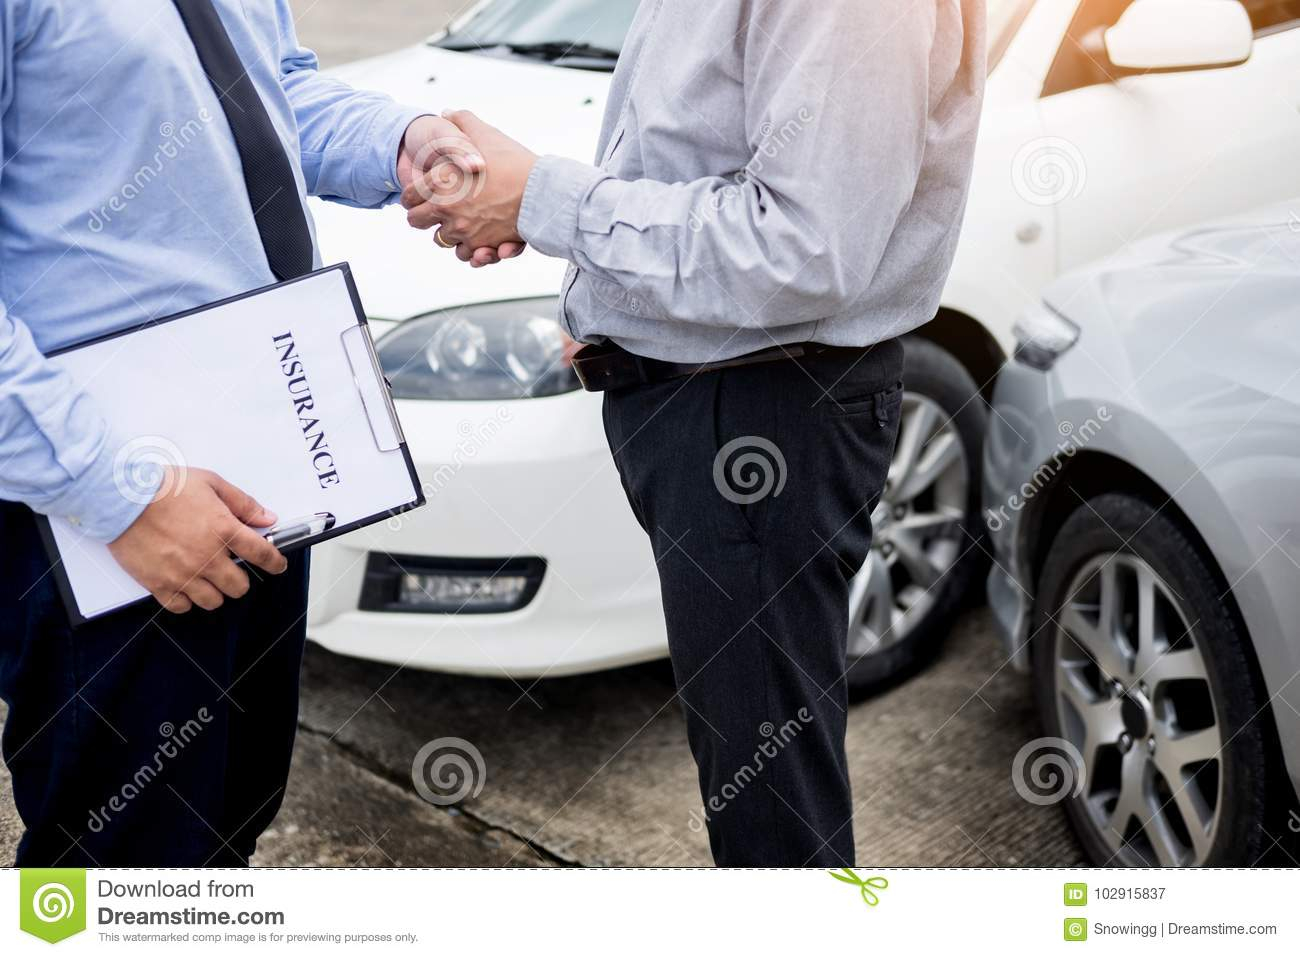 Customer Shake Hand With Auto Insurance Agents After pertaining to measurements 1300 X 957